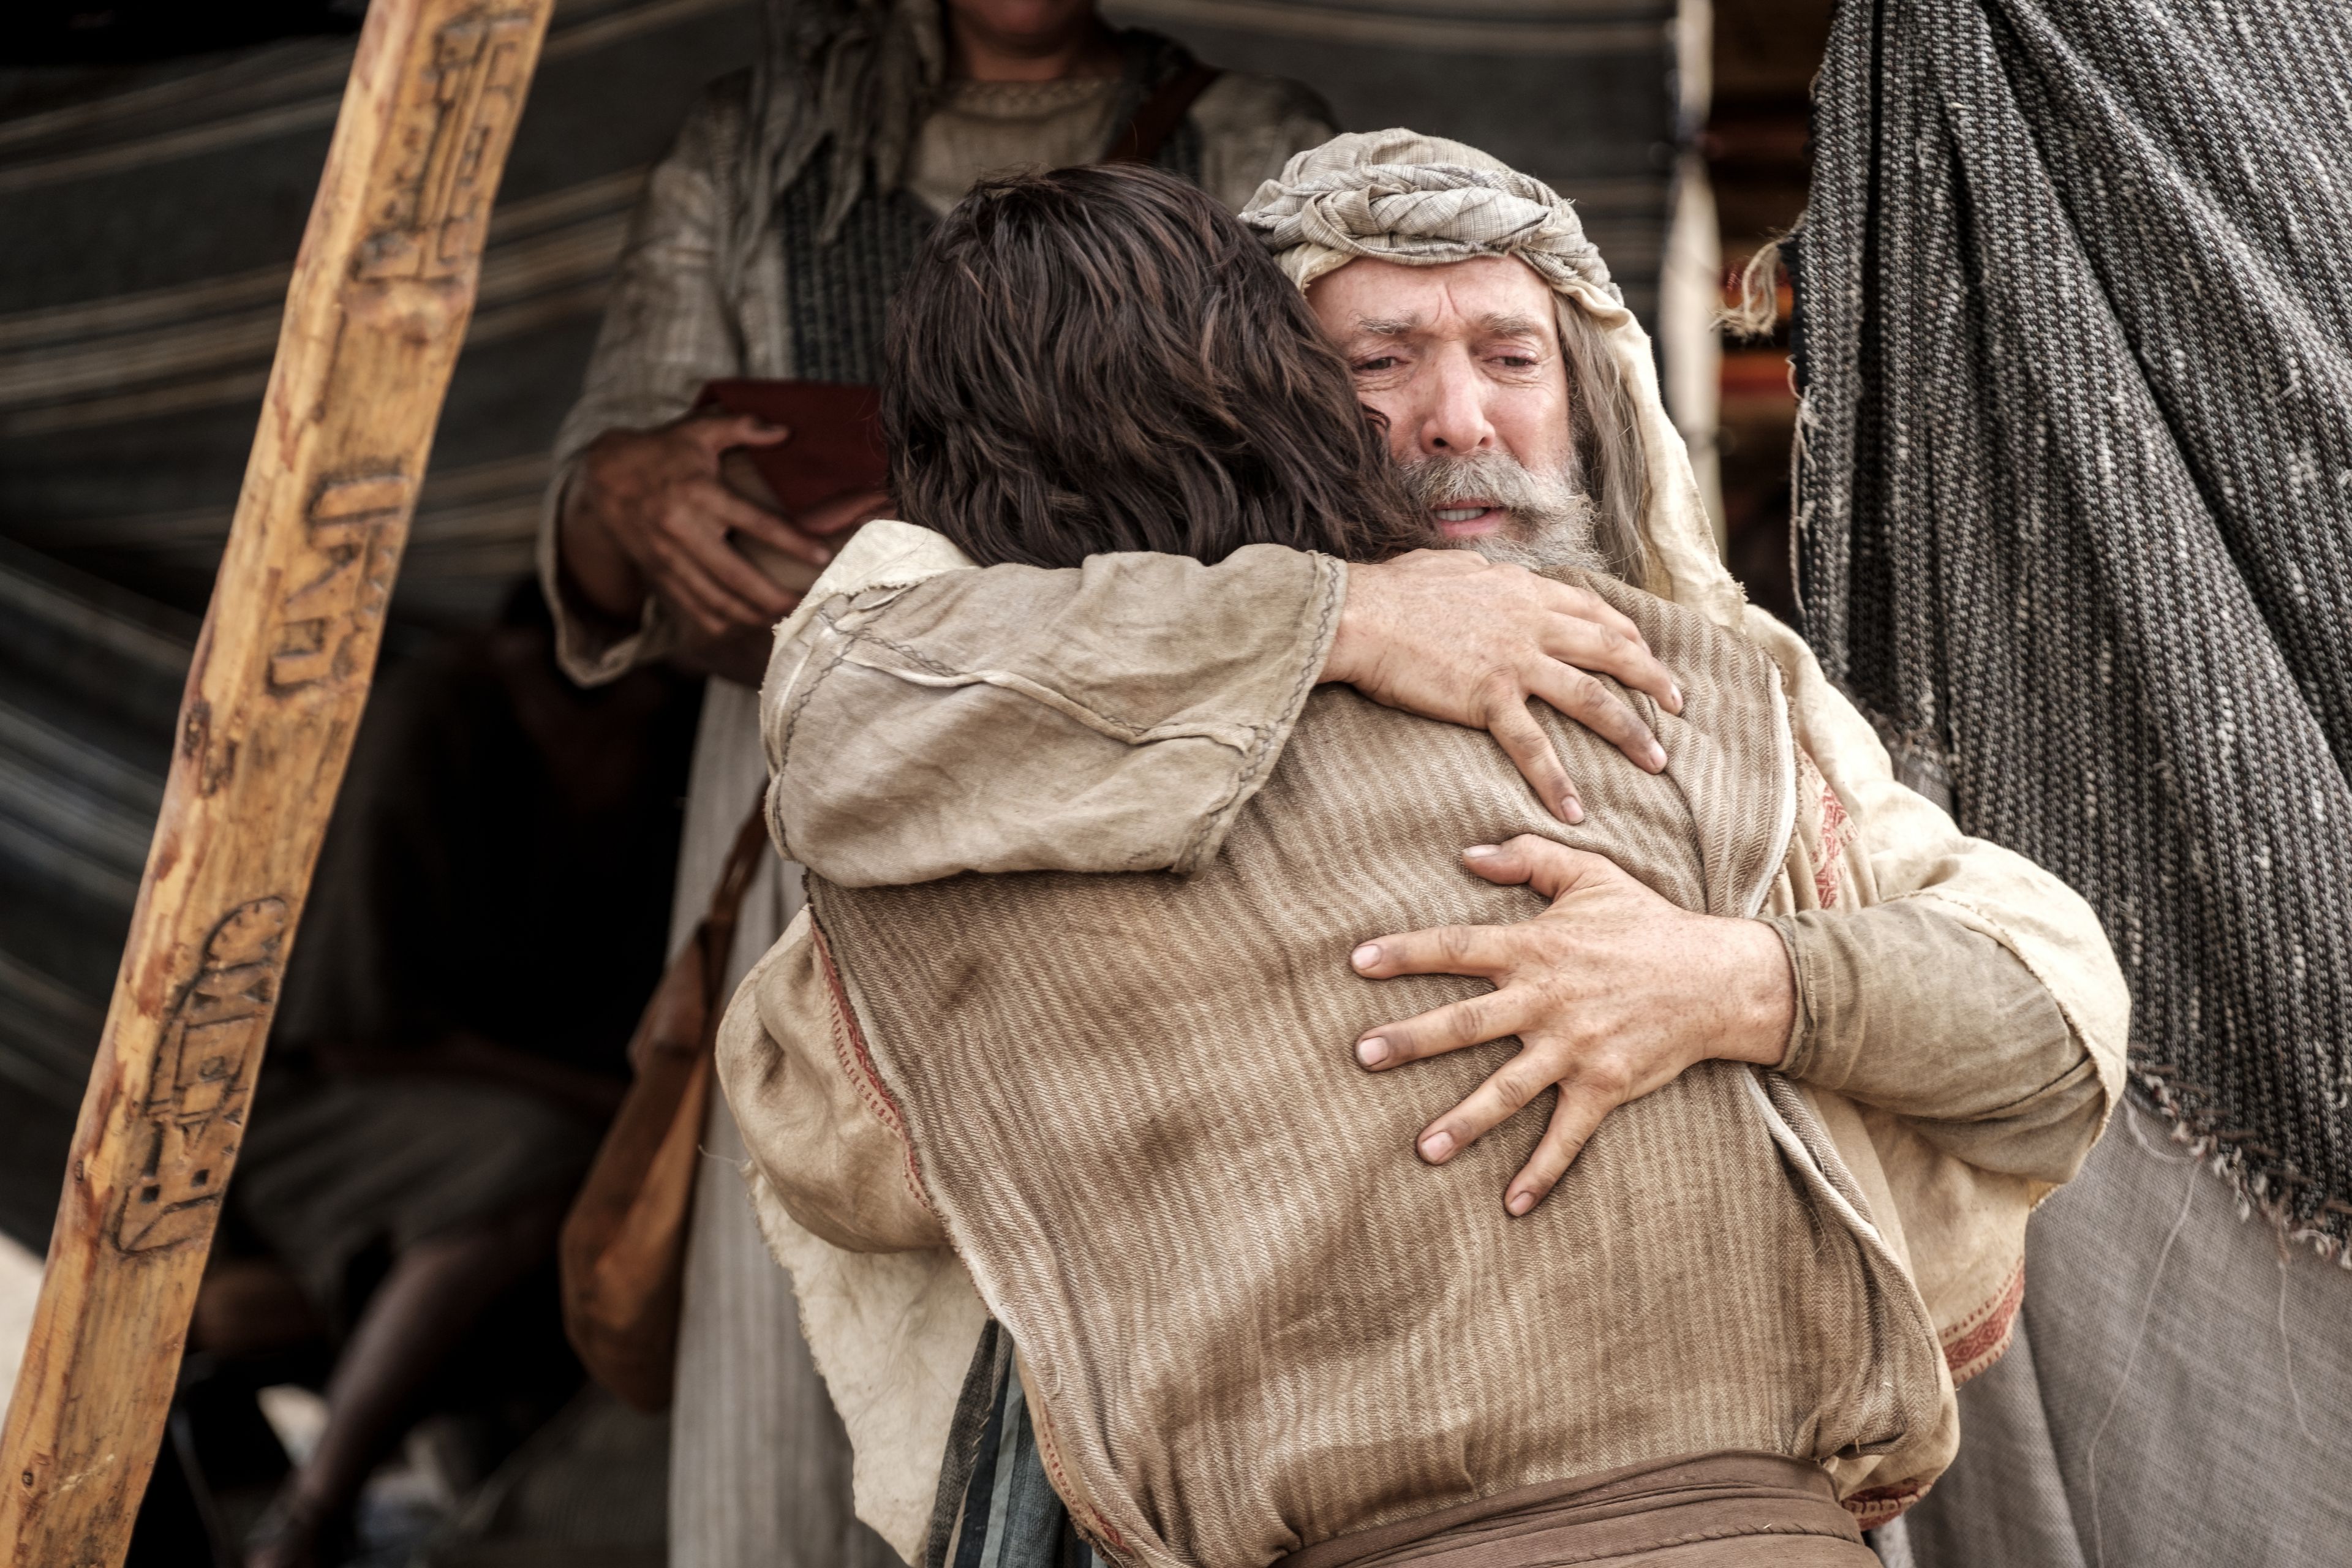 Lehi embraces Nephi after he asks whither to go to obtain food in the wilderness. 